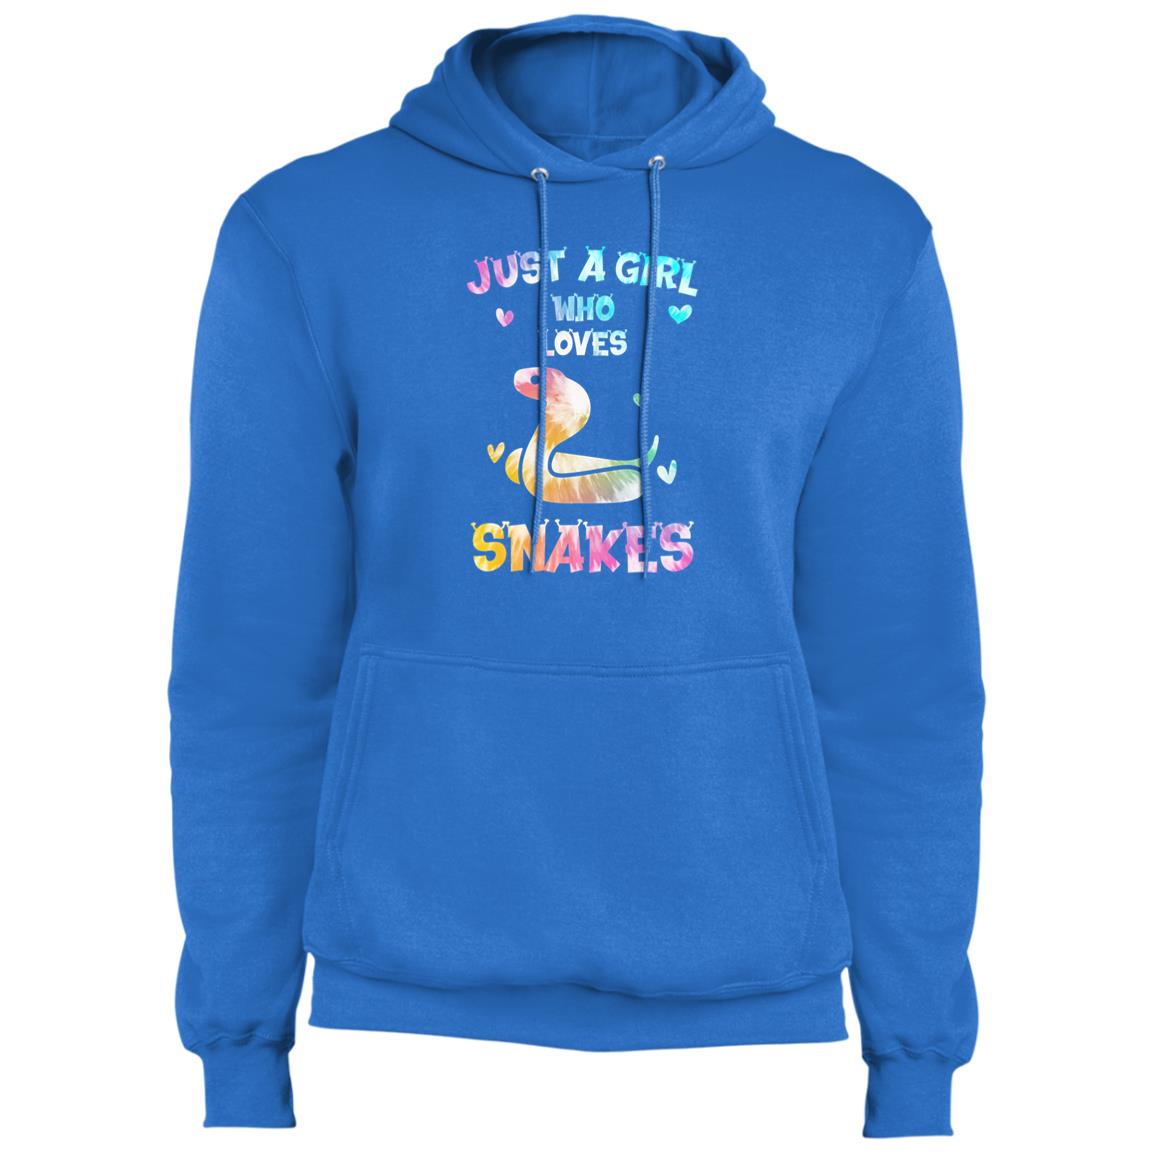 Just A Girl Who Loves Snakes - Fleece Pullover Hoodie